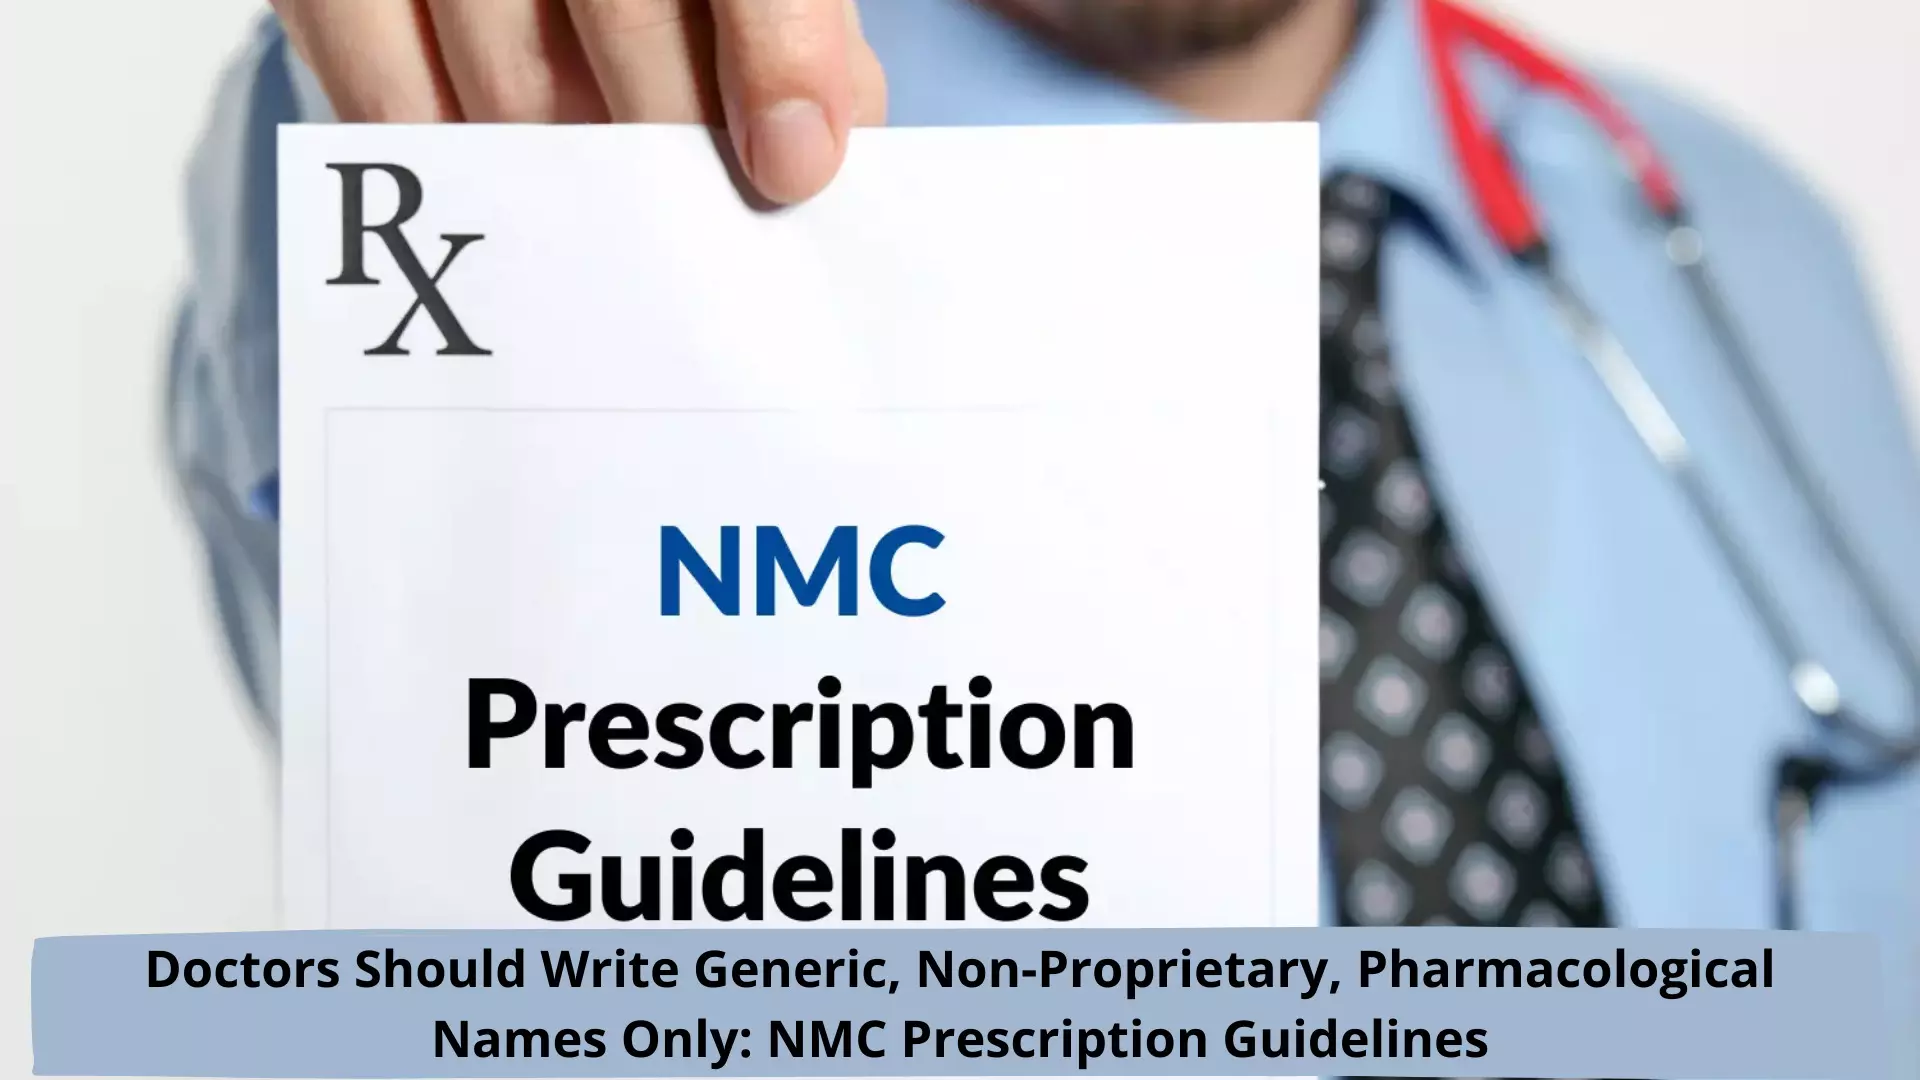 Doctors should write generic, non-proprietary, pharmacological names only: NMC prescription guidelines